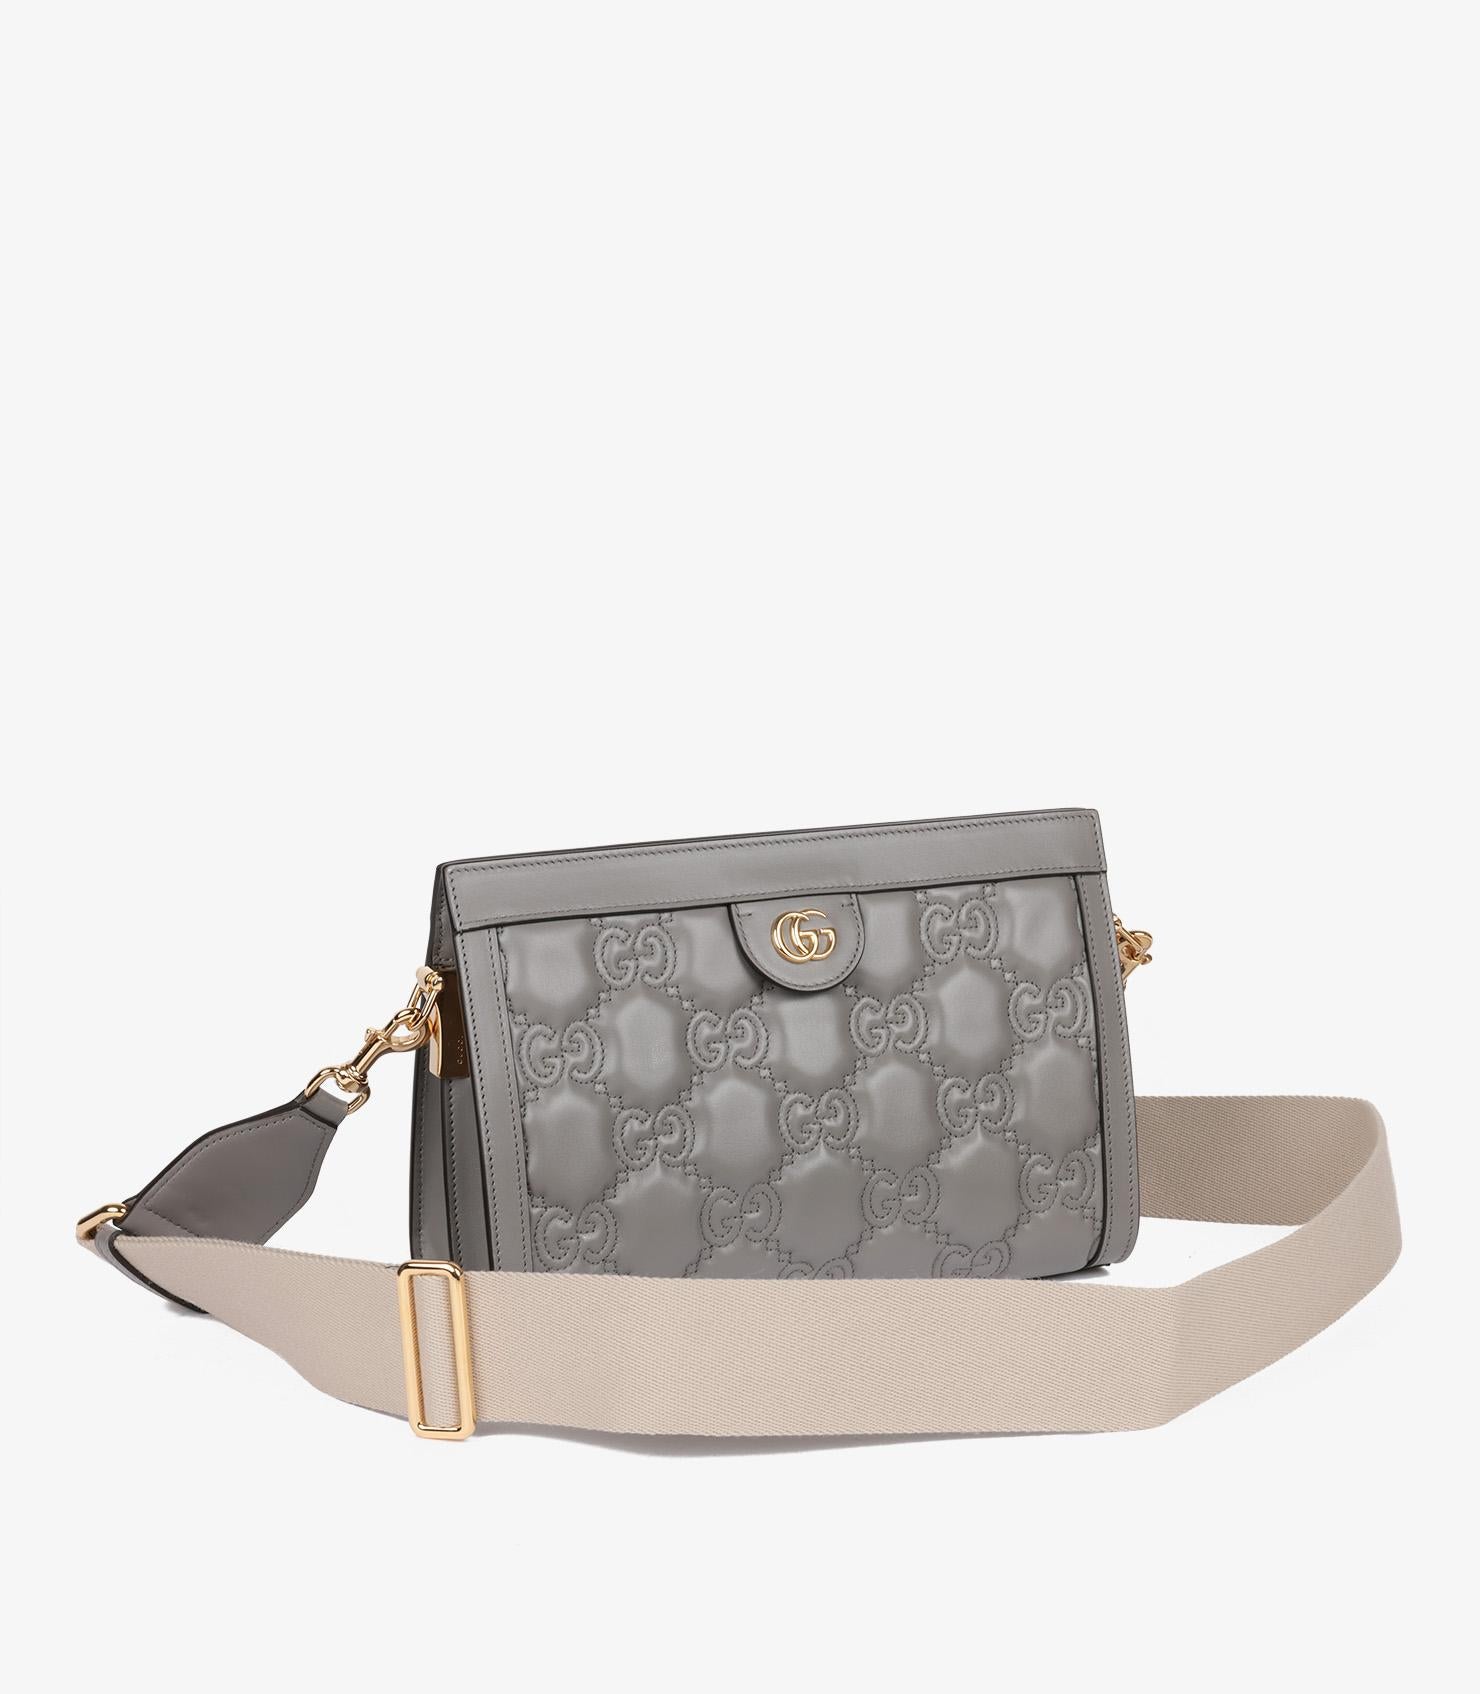 Gucci Grey GG Quilted Calfskin Leather Small Matelassé Bag In Excellent Condition For Sale In Bishop's Stortford, Hertfordshire